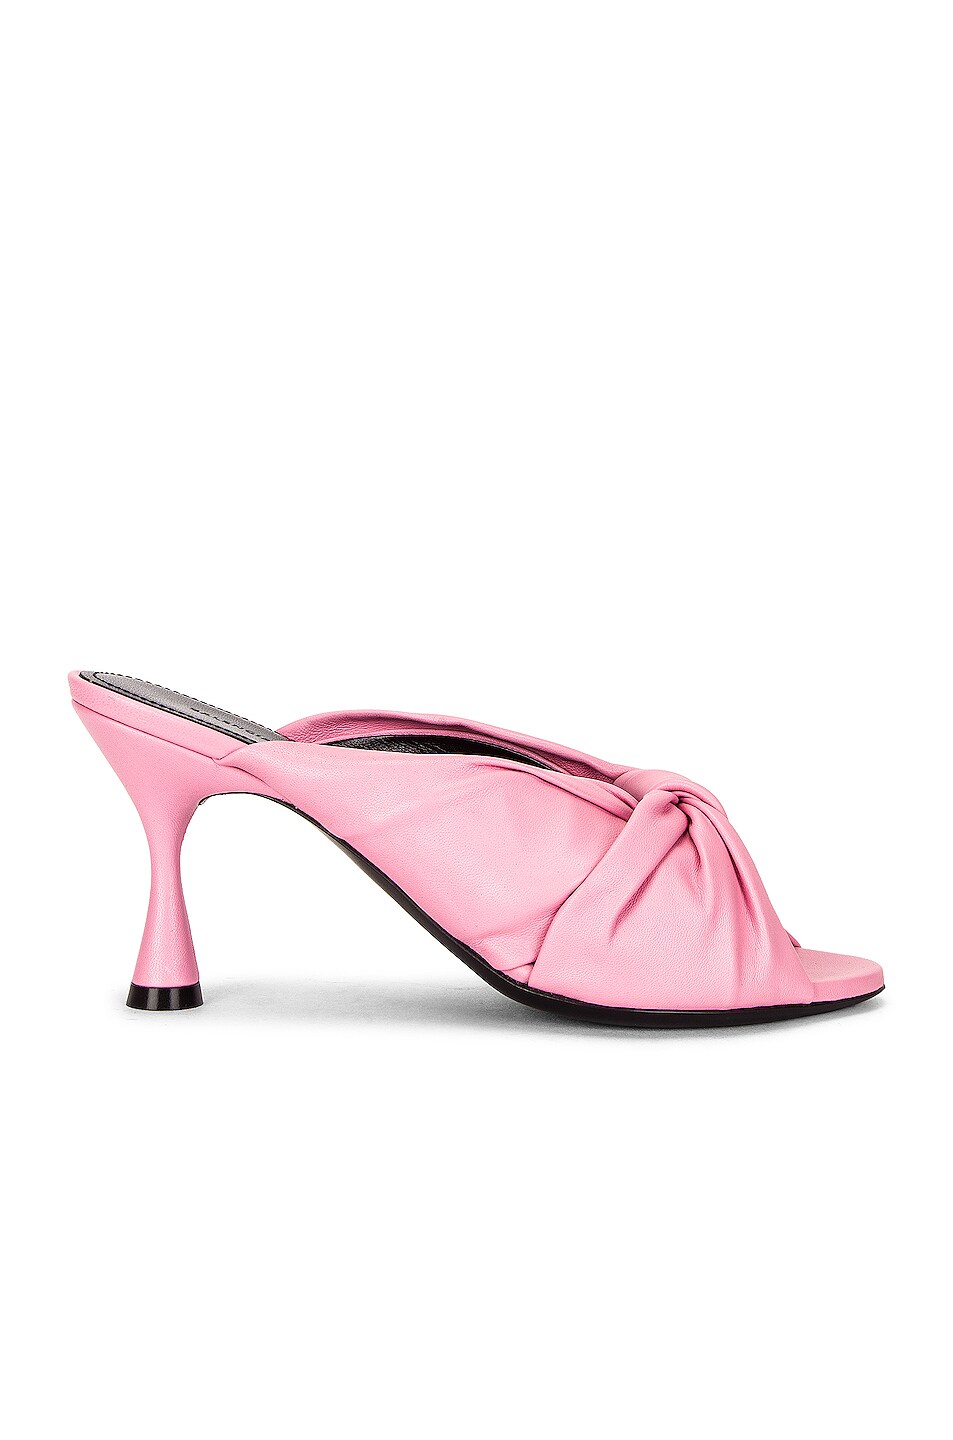 Image 1 of Balenciaga Drapy Sandals in New Pink